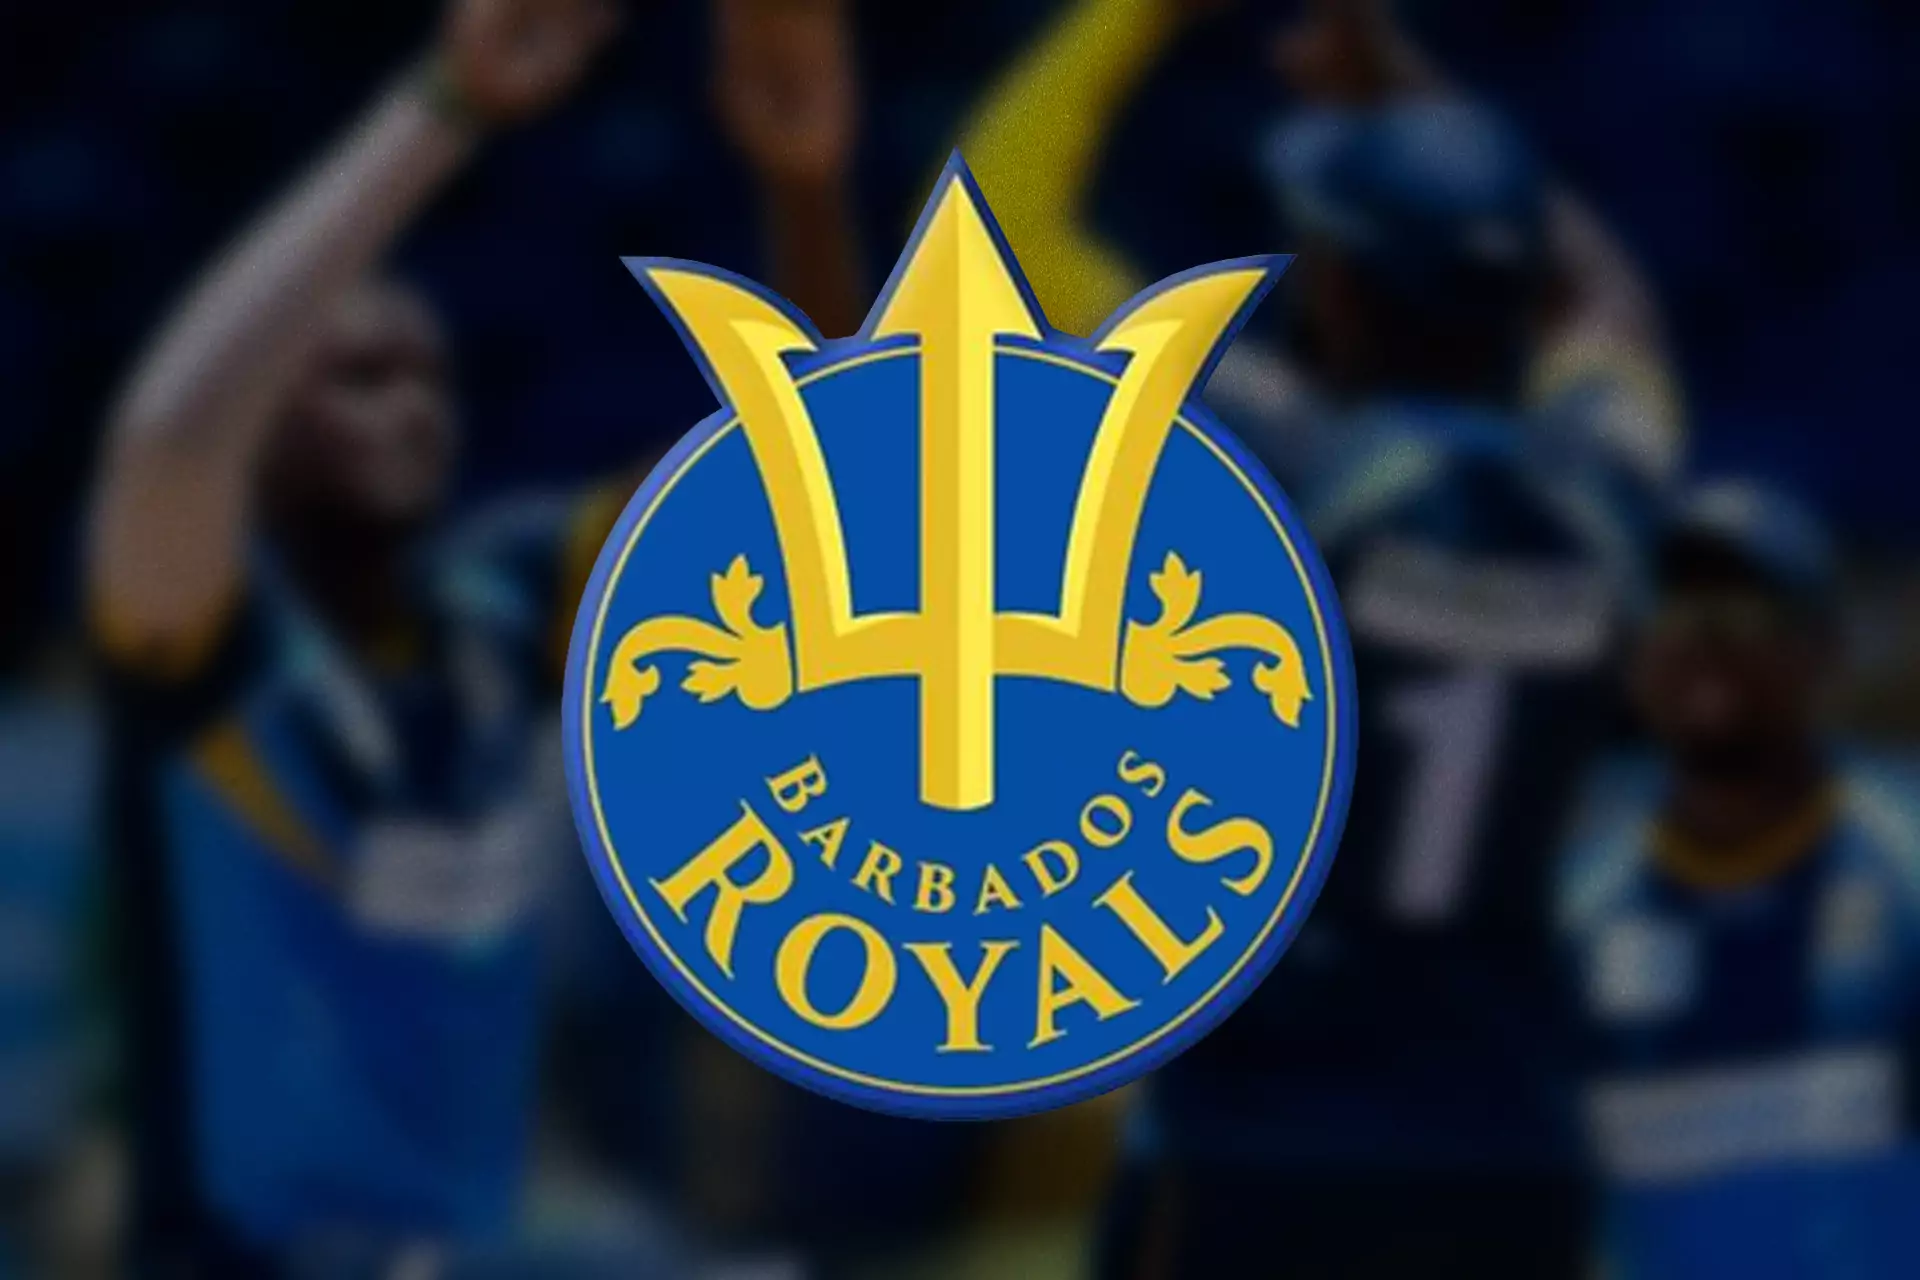 The Barbados Royals is one of the CPL teams.